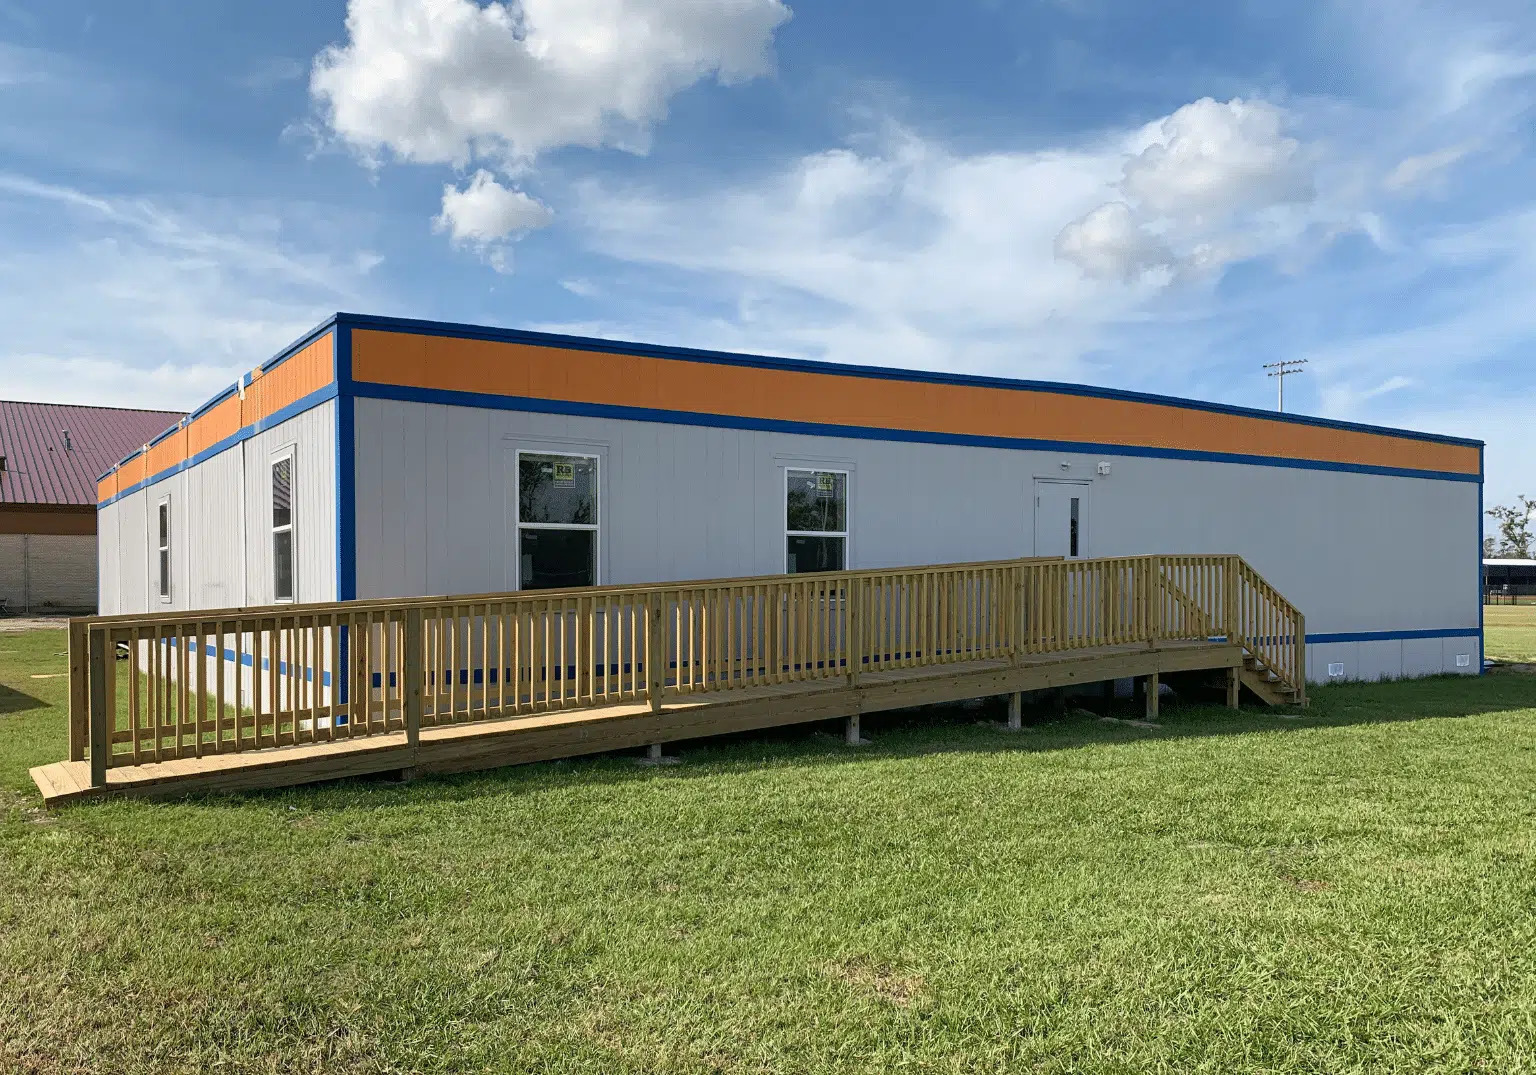 The Ultimate Guide to Modular Buildings